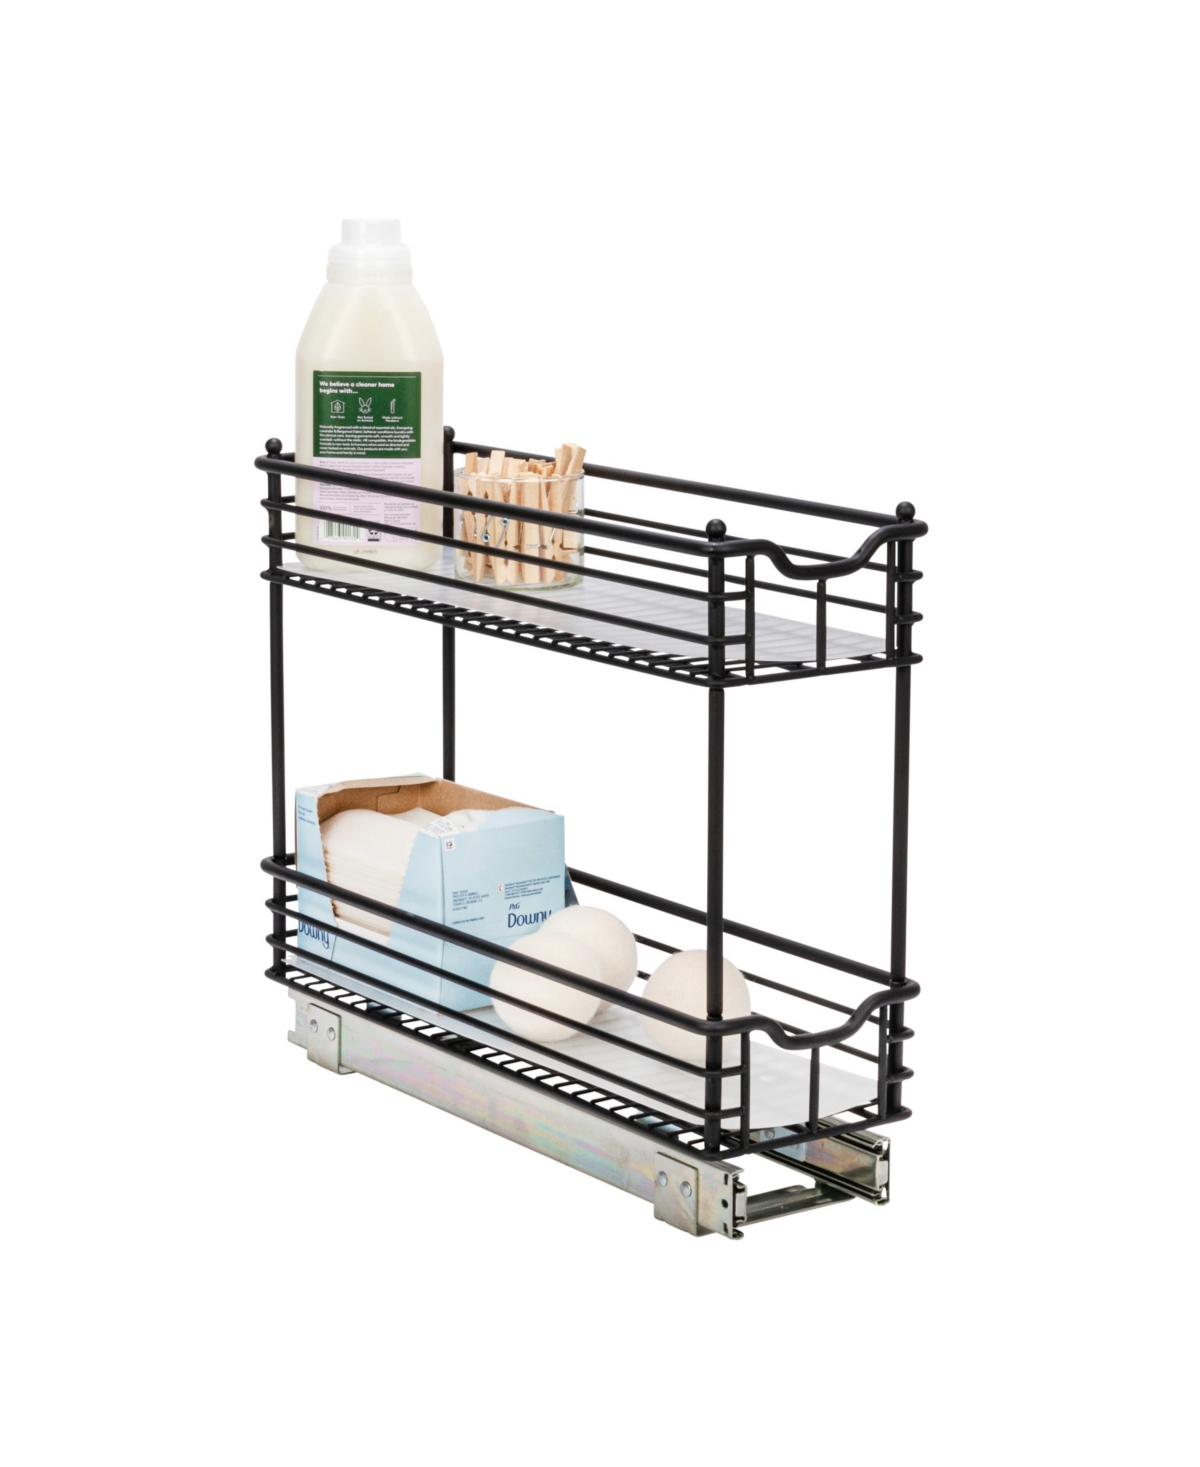 Glidez Multipurpose Paint-Finished Steel Pull-Out/Slide-Out Storage Organizer with Plastic Liners for Under Cabinet 2-Tier Design